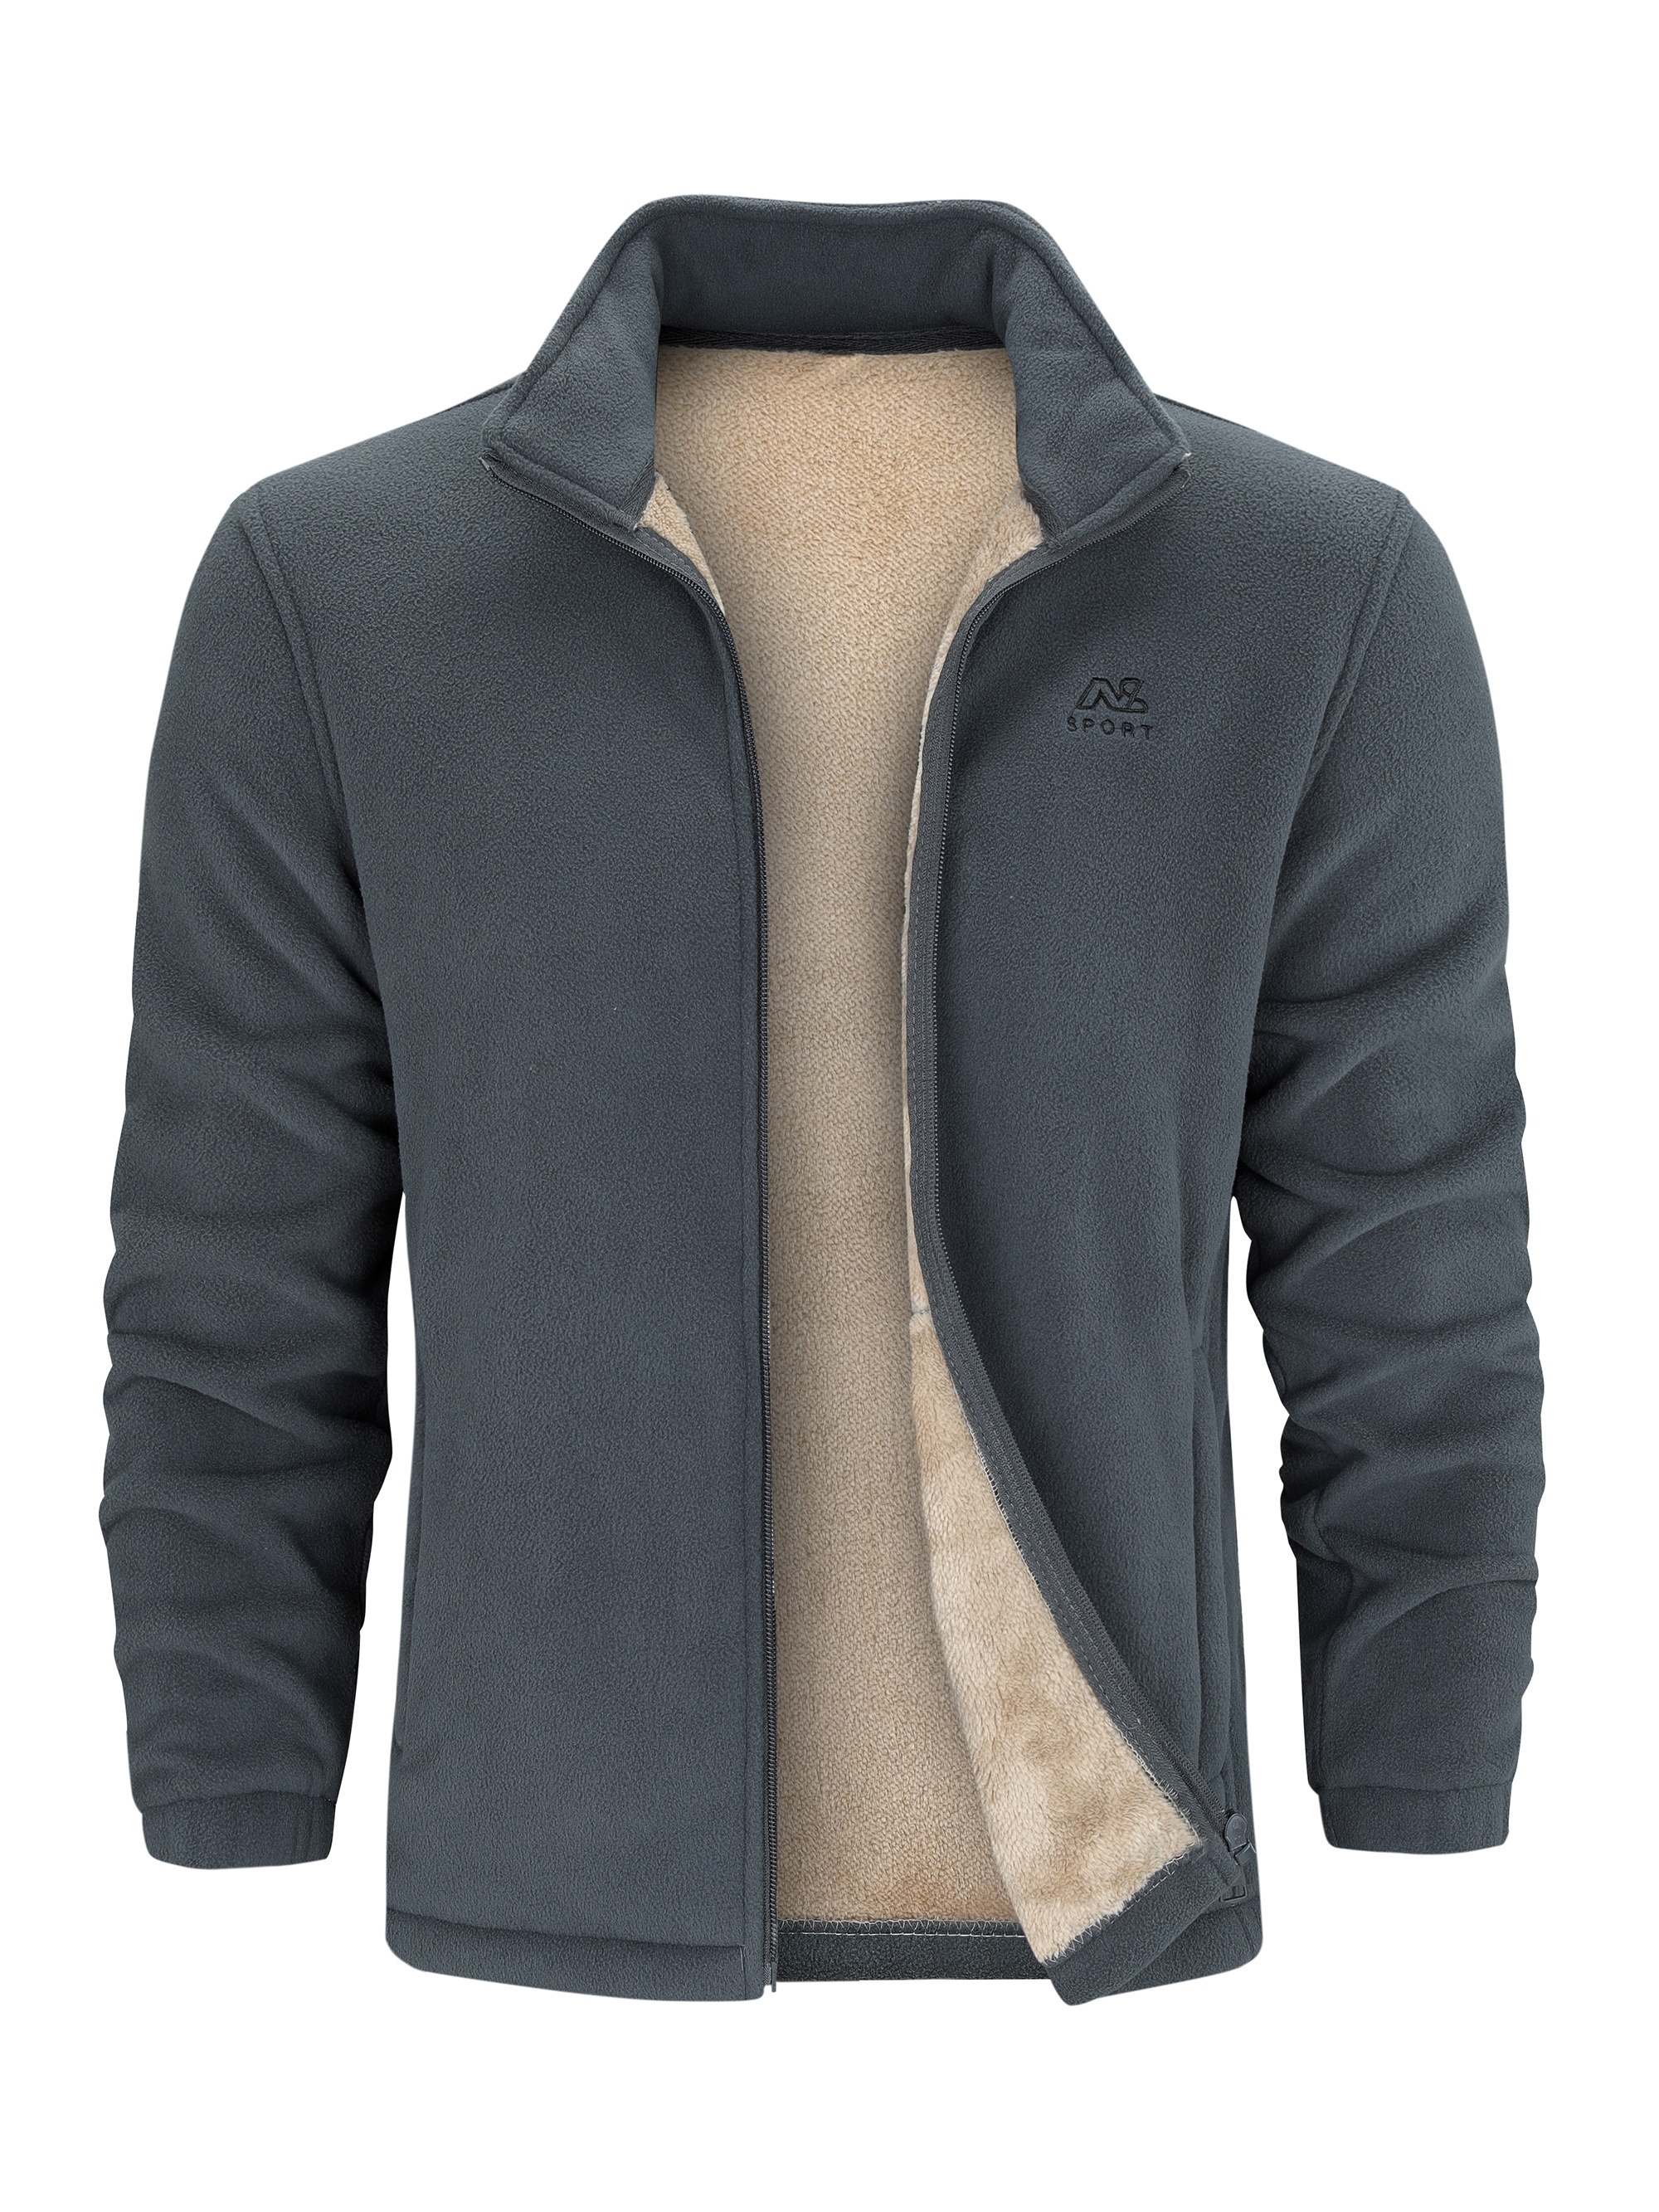 warm stand collar fleece jacket mens casual comfortable solid color zip up jacket coat for fall winter details 10